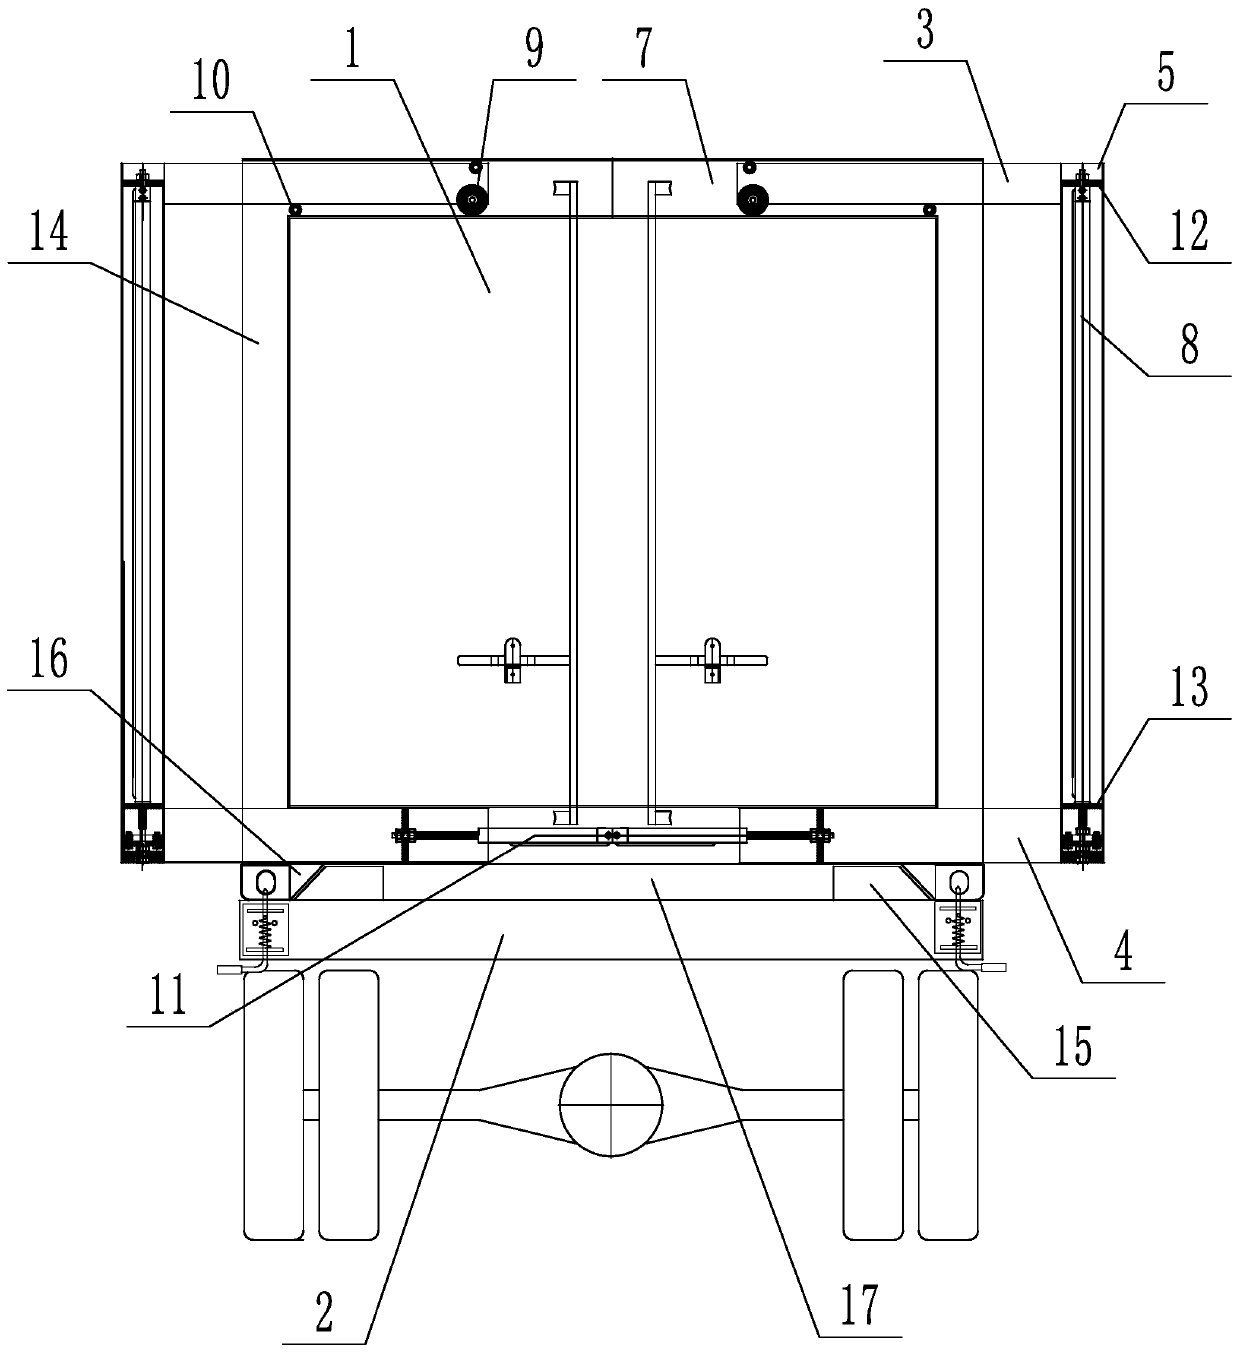 Self-loading and unloading turnover box